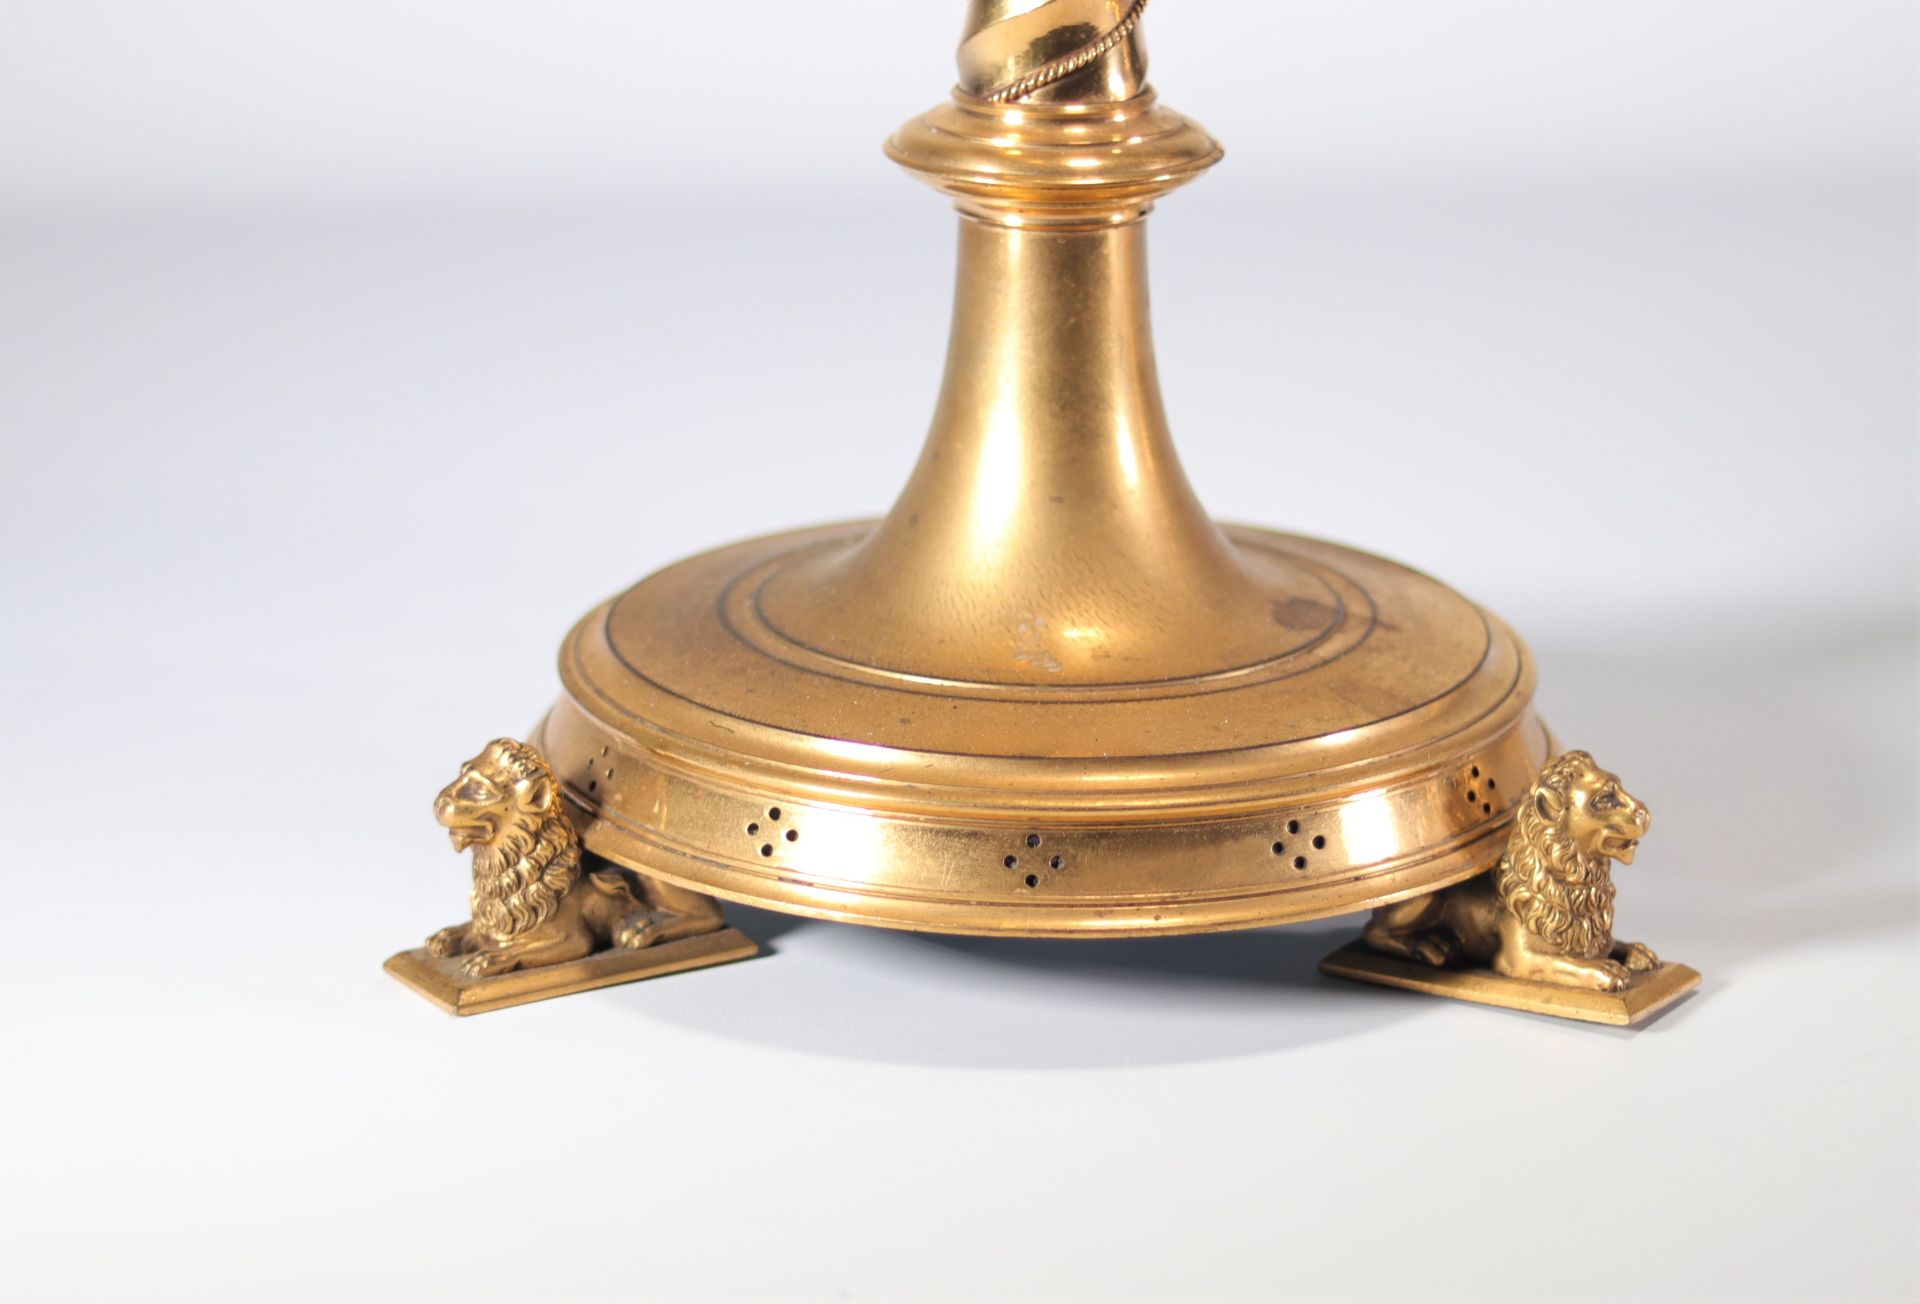 Pair of large candlesticks in gilded bronze - exceptional gilding - Image 3 of 3